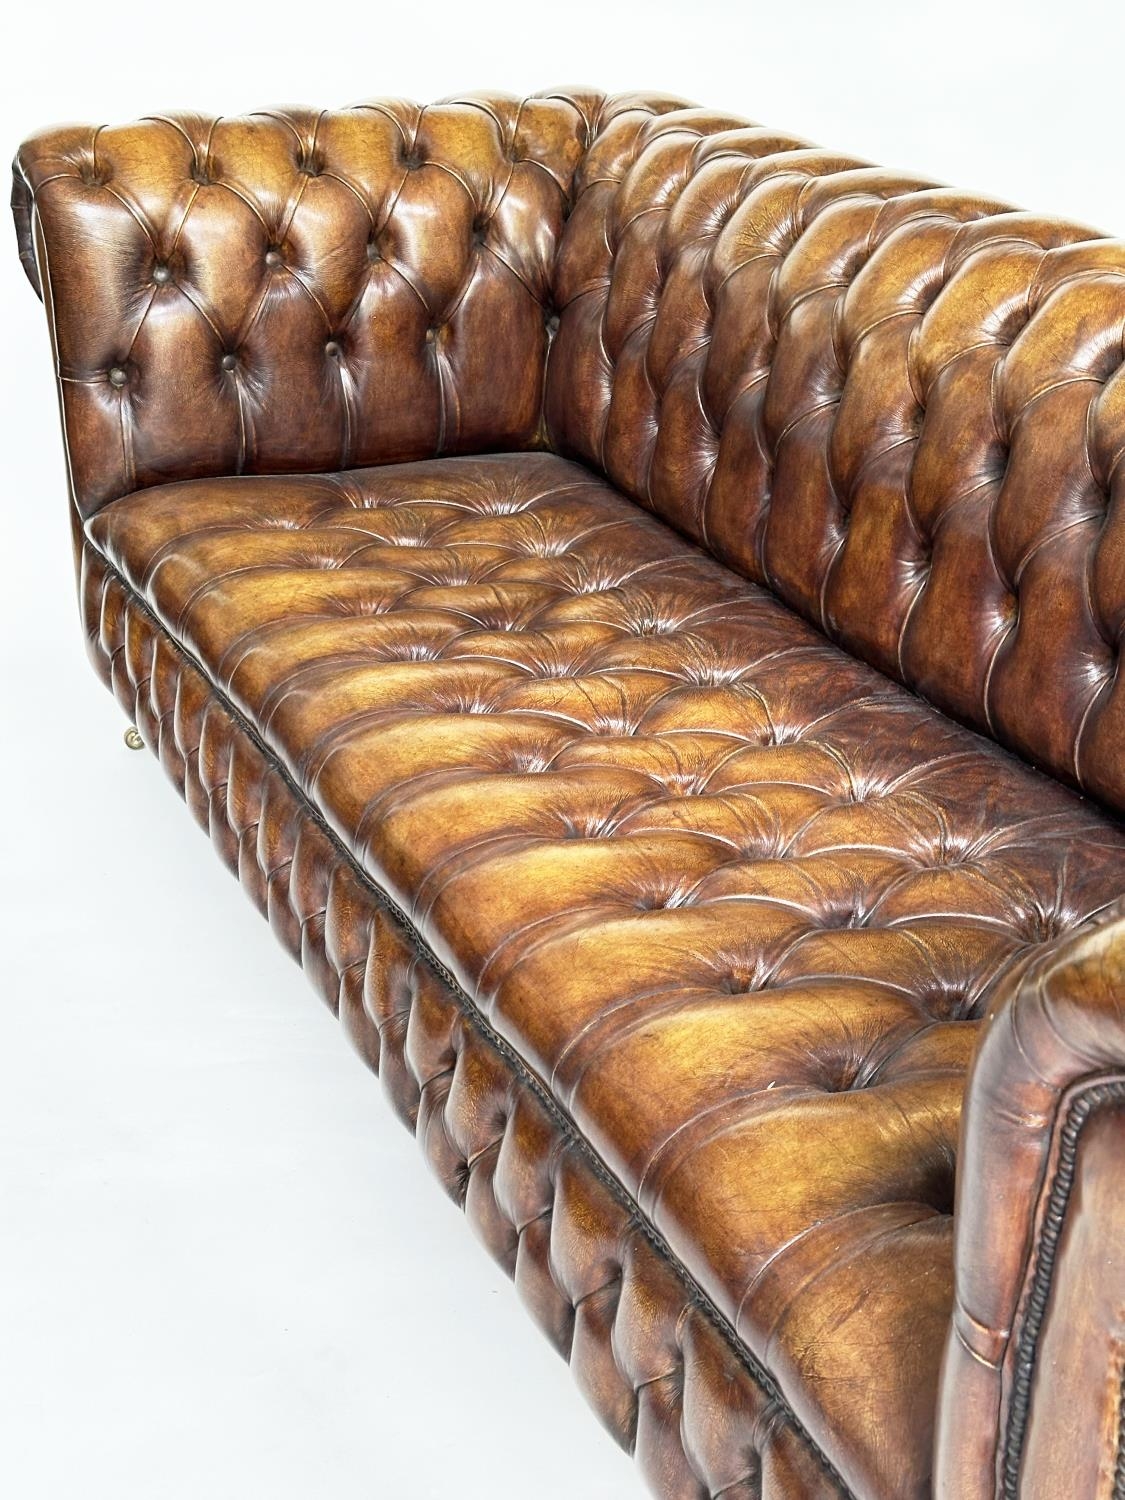 CHESTERFIELD SOFA, traditional hand finished natural soft tan leather deep button upholstery with - Image 24 of 24